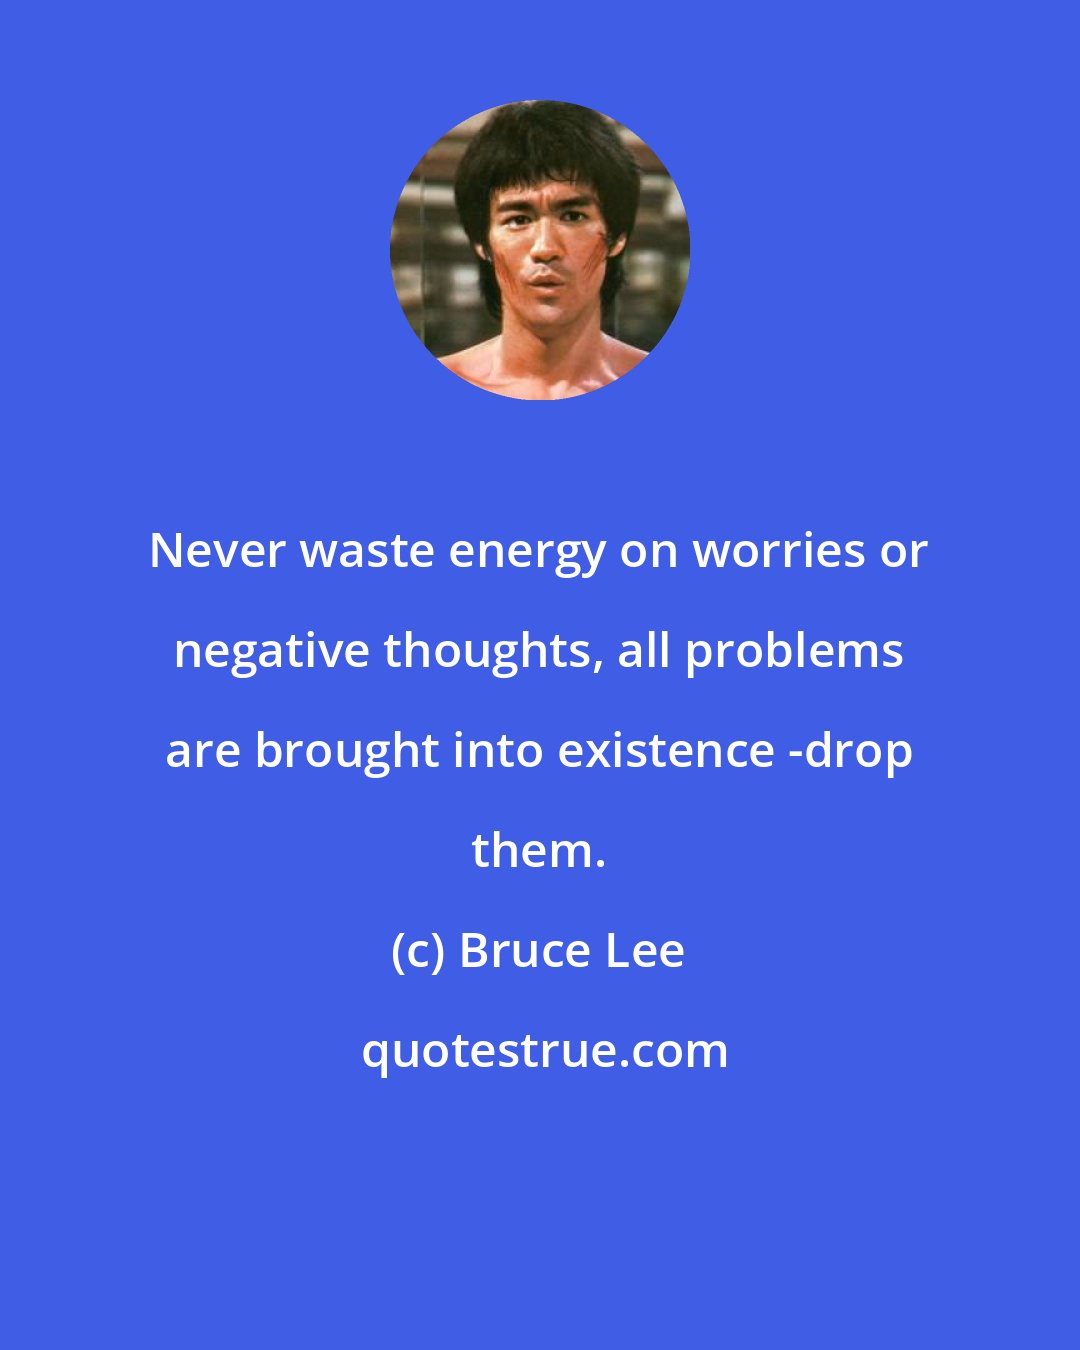 Bruce Lee: Never waste energy on worries or negative thoughts, all problems are brought into existence -drop them.